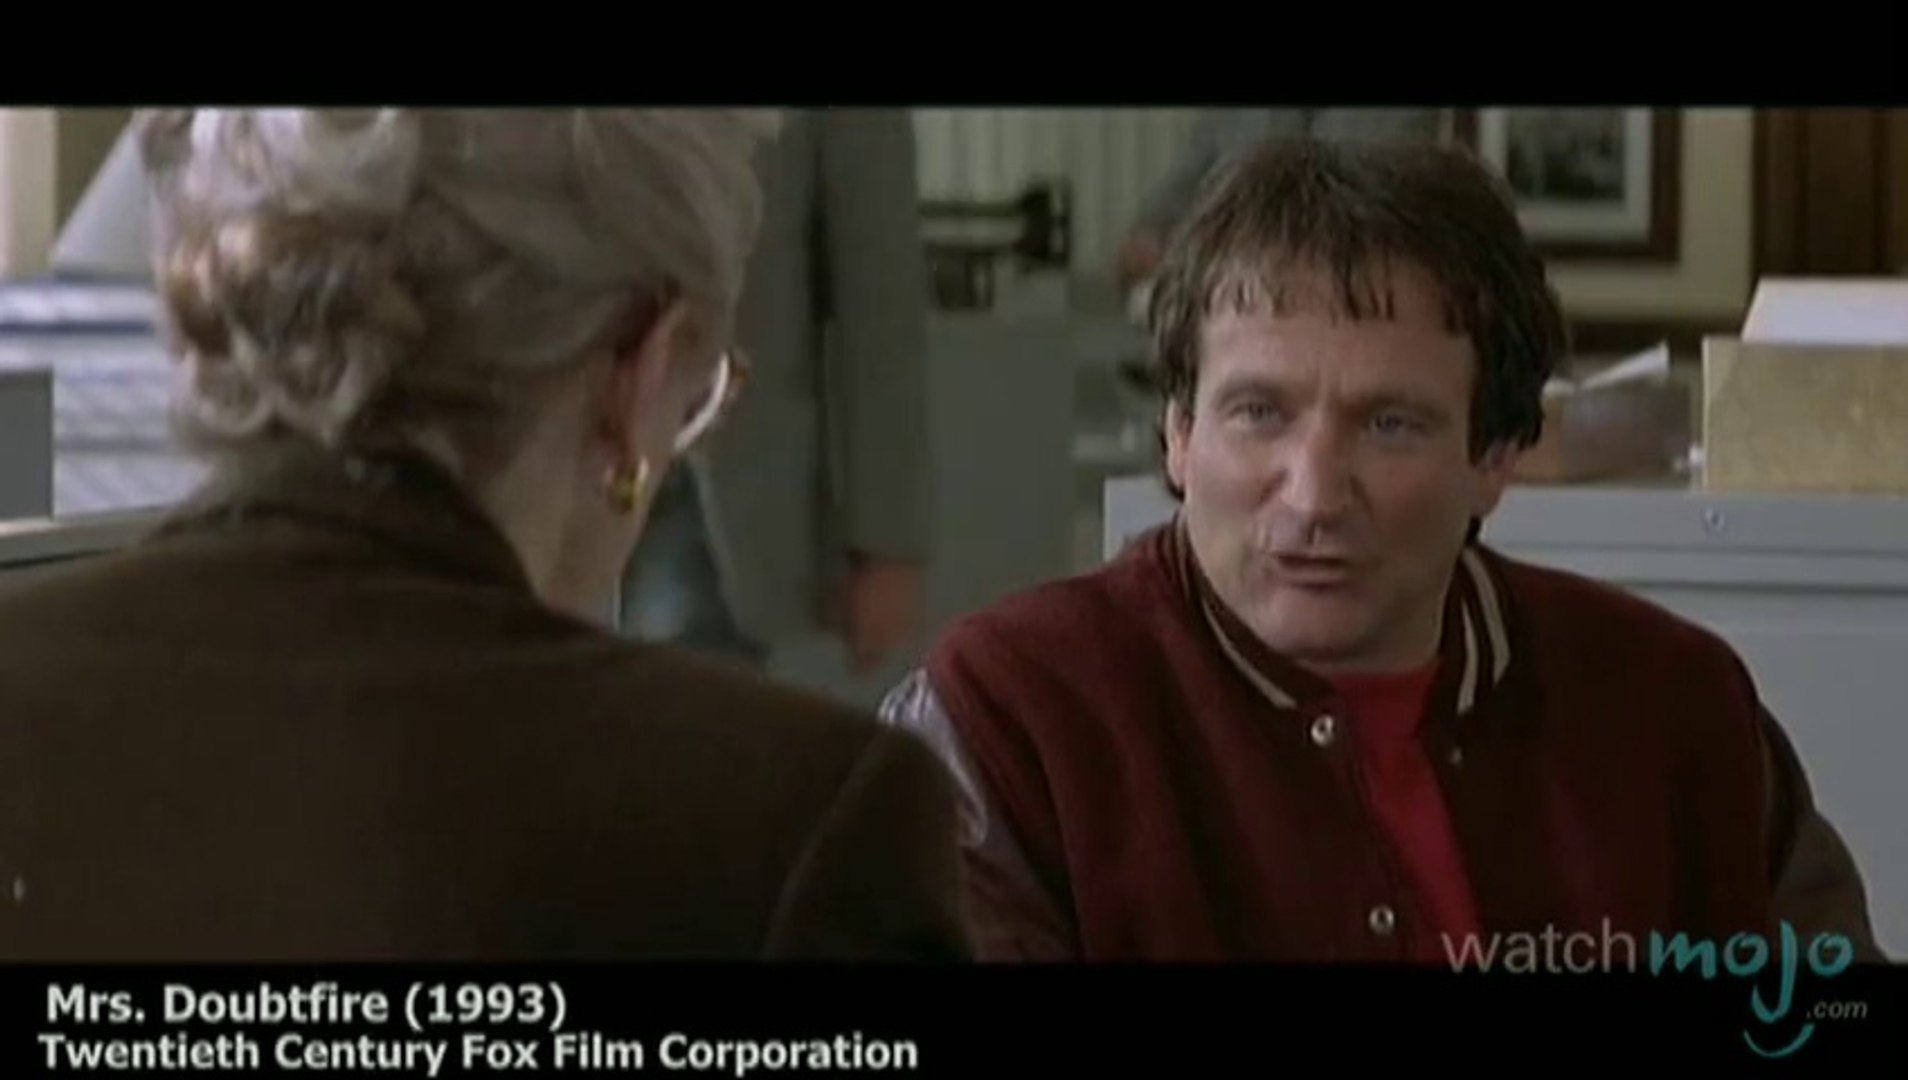 Top 10 Robin Williams Performances - video Dailymotion